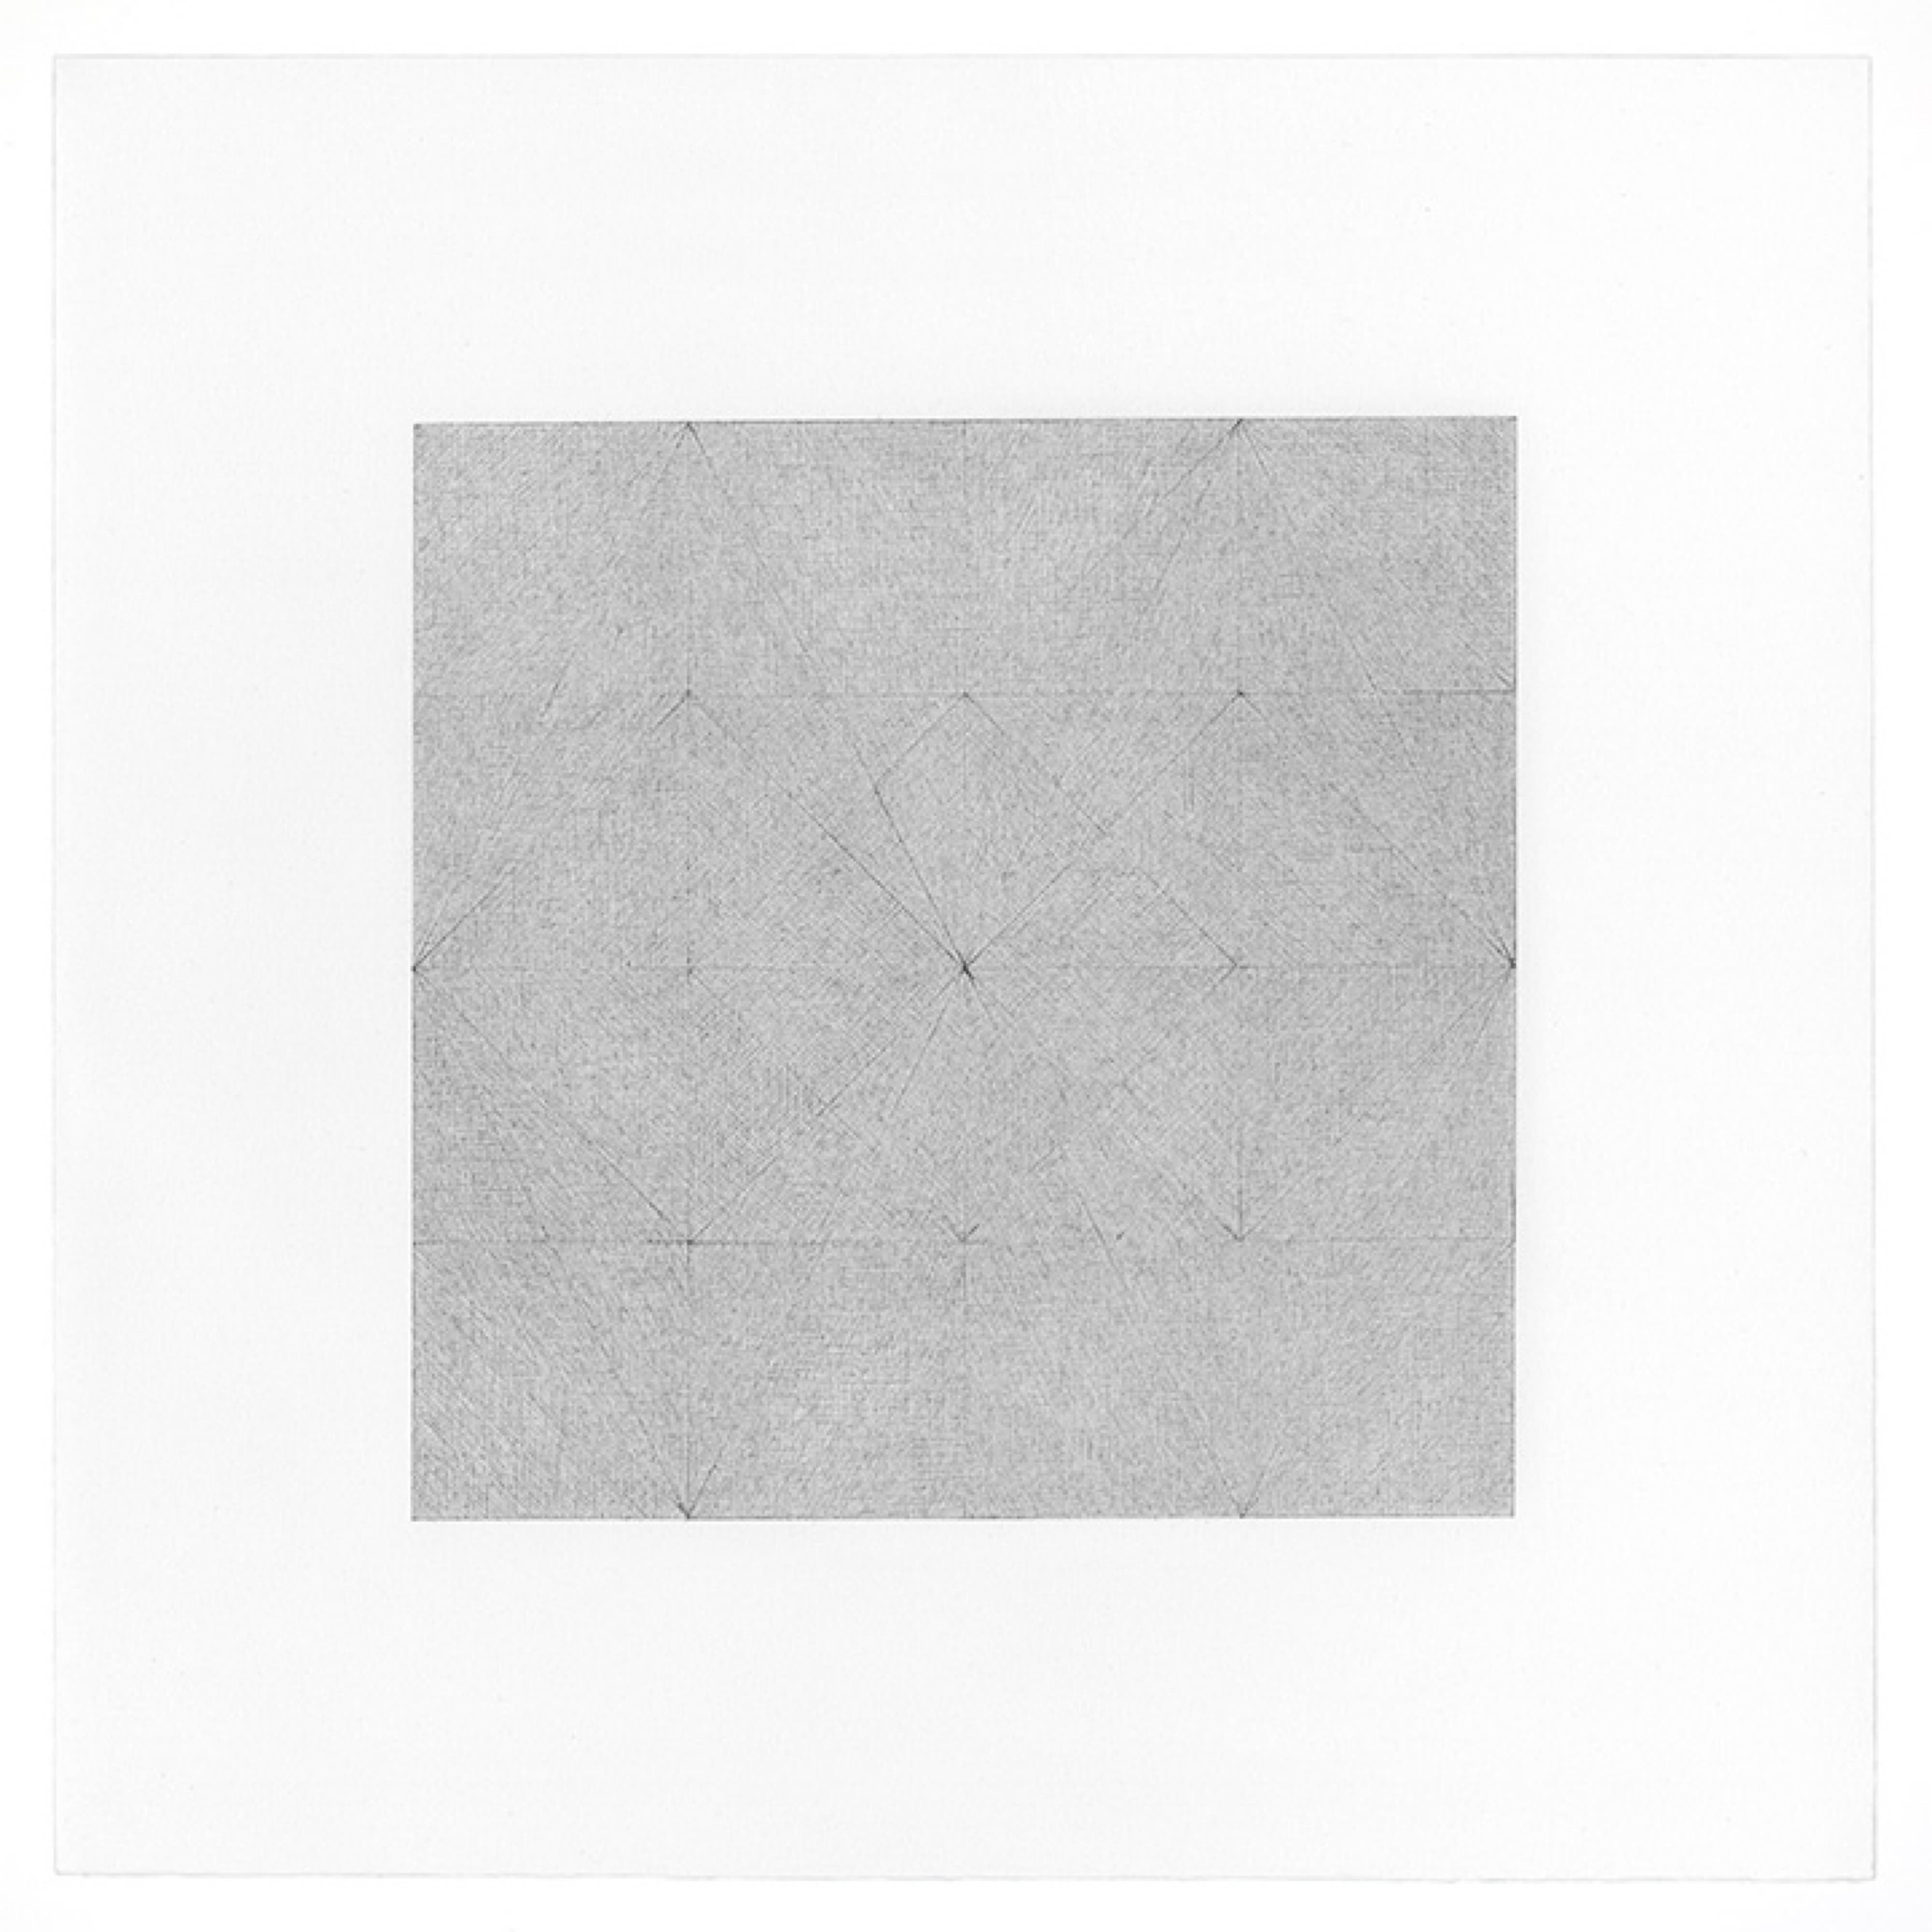 Modern Patrick Carrara Garden of Silence Triptych, Graphite on Paper, 2009 For Sale